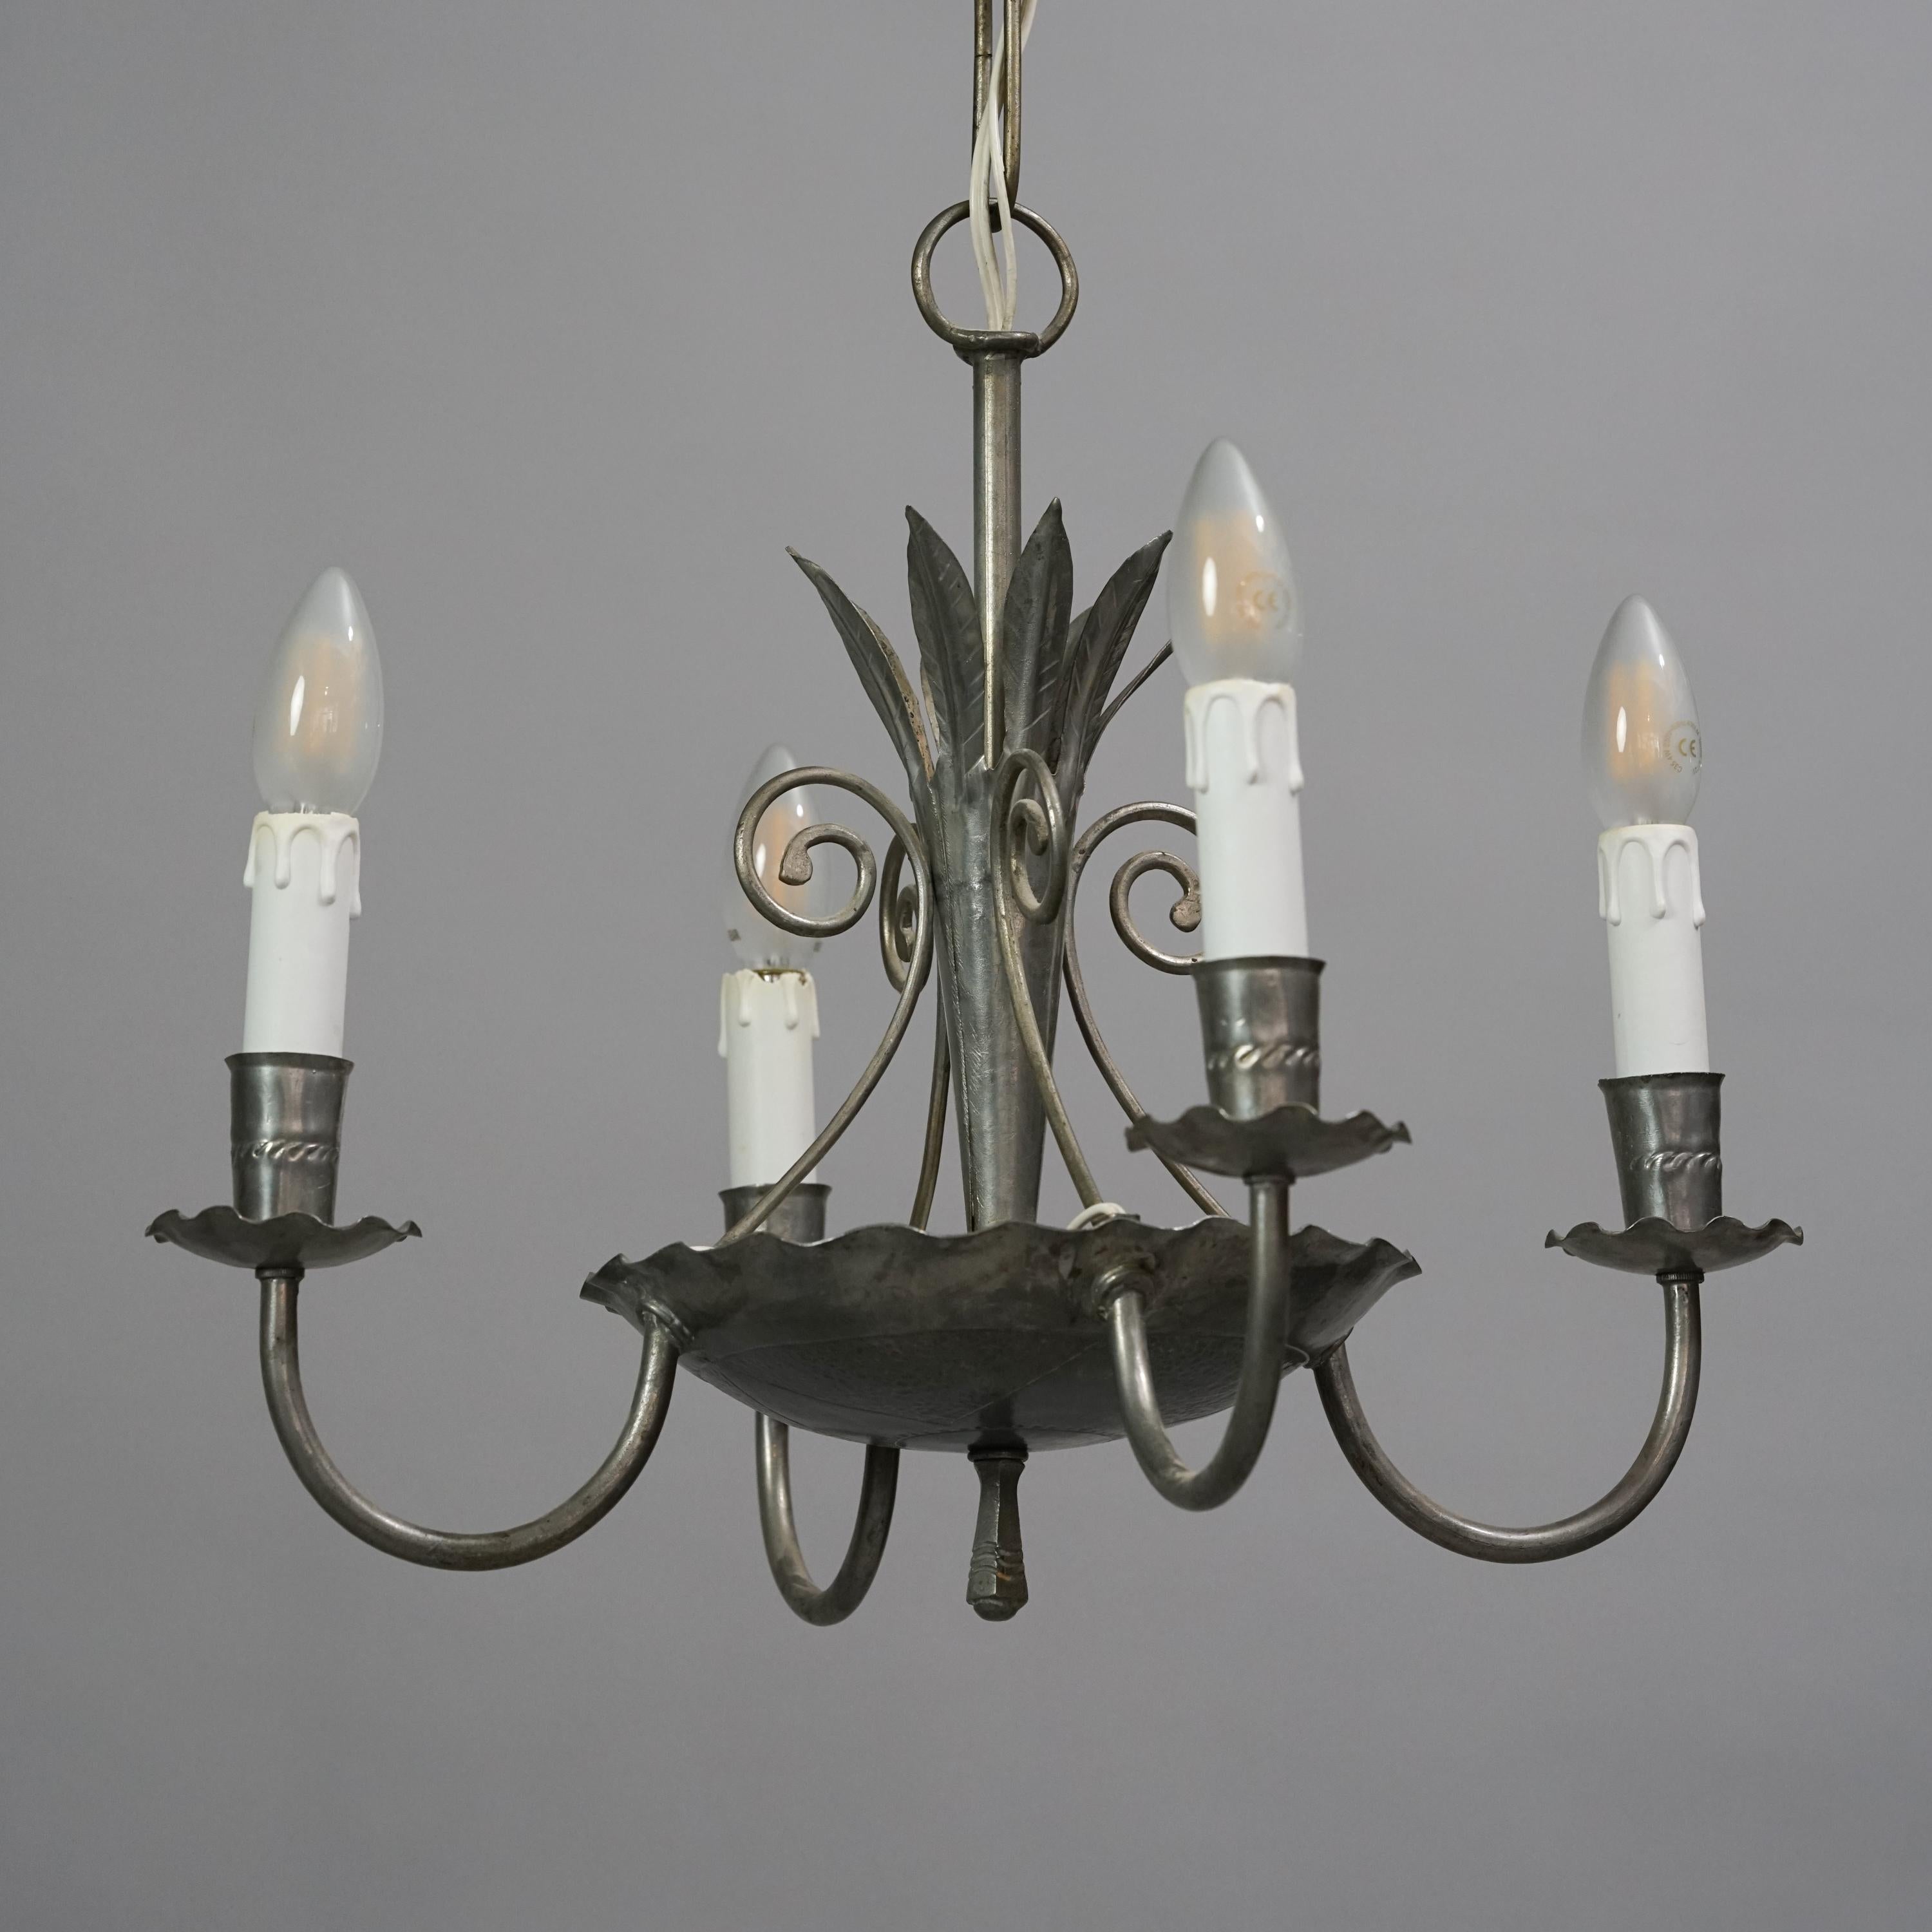 Mid-20th Century Rare Finnish Iron Chandelier Attributed to Paavo Tynell, 1920s For Sale